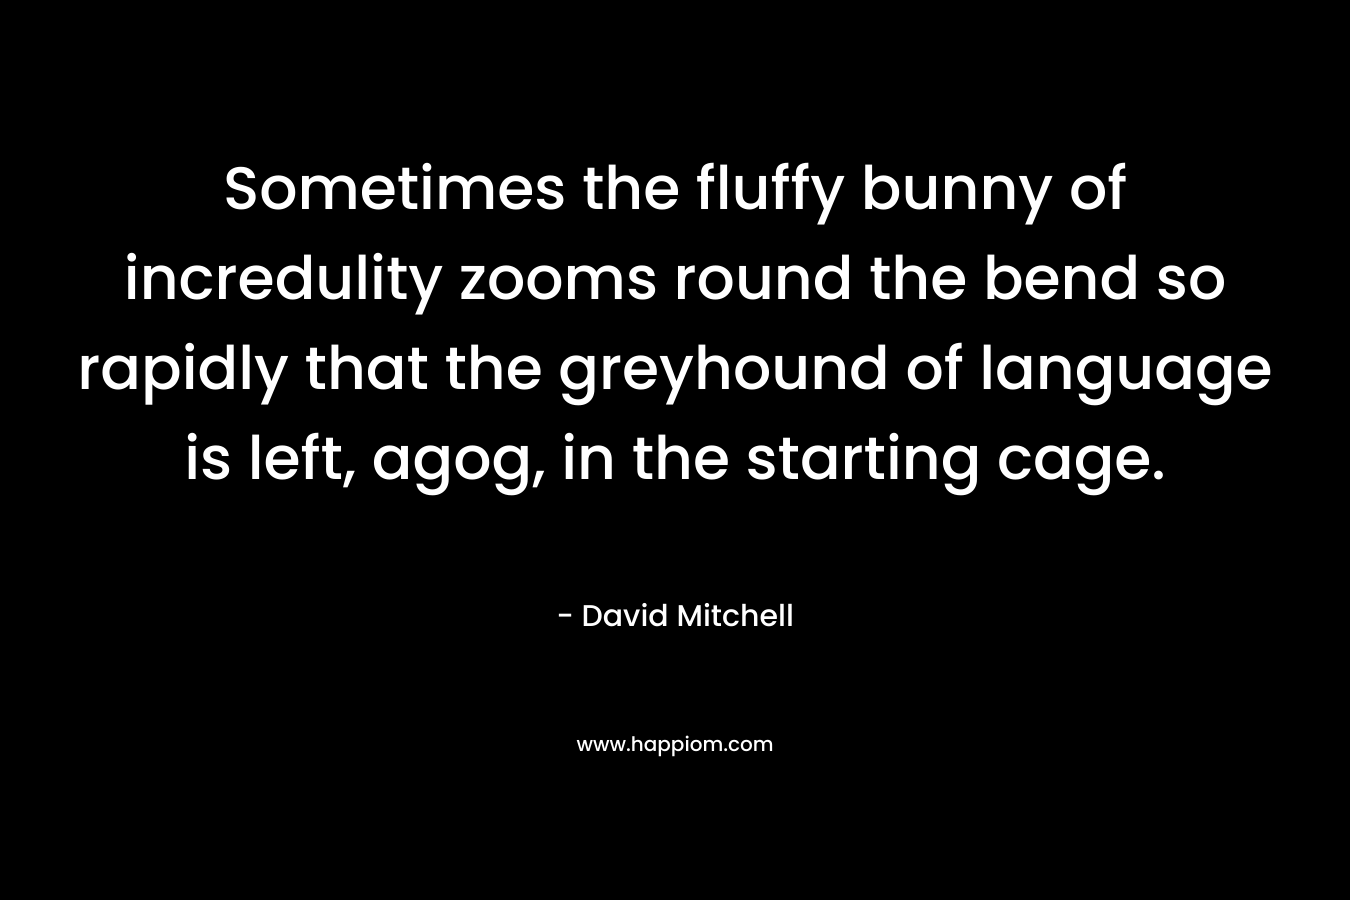 Sometimes the fluffy bunny of incredulity zooms round the bend so rapidly that the greyhound of language is left, agog, in the starting cage.